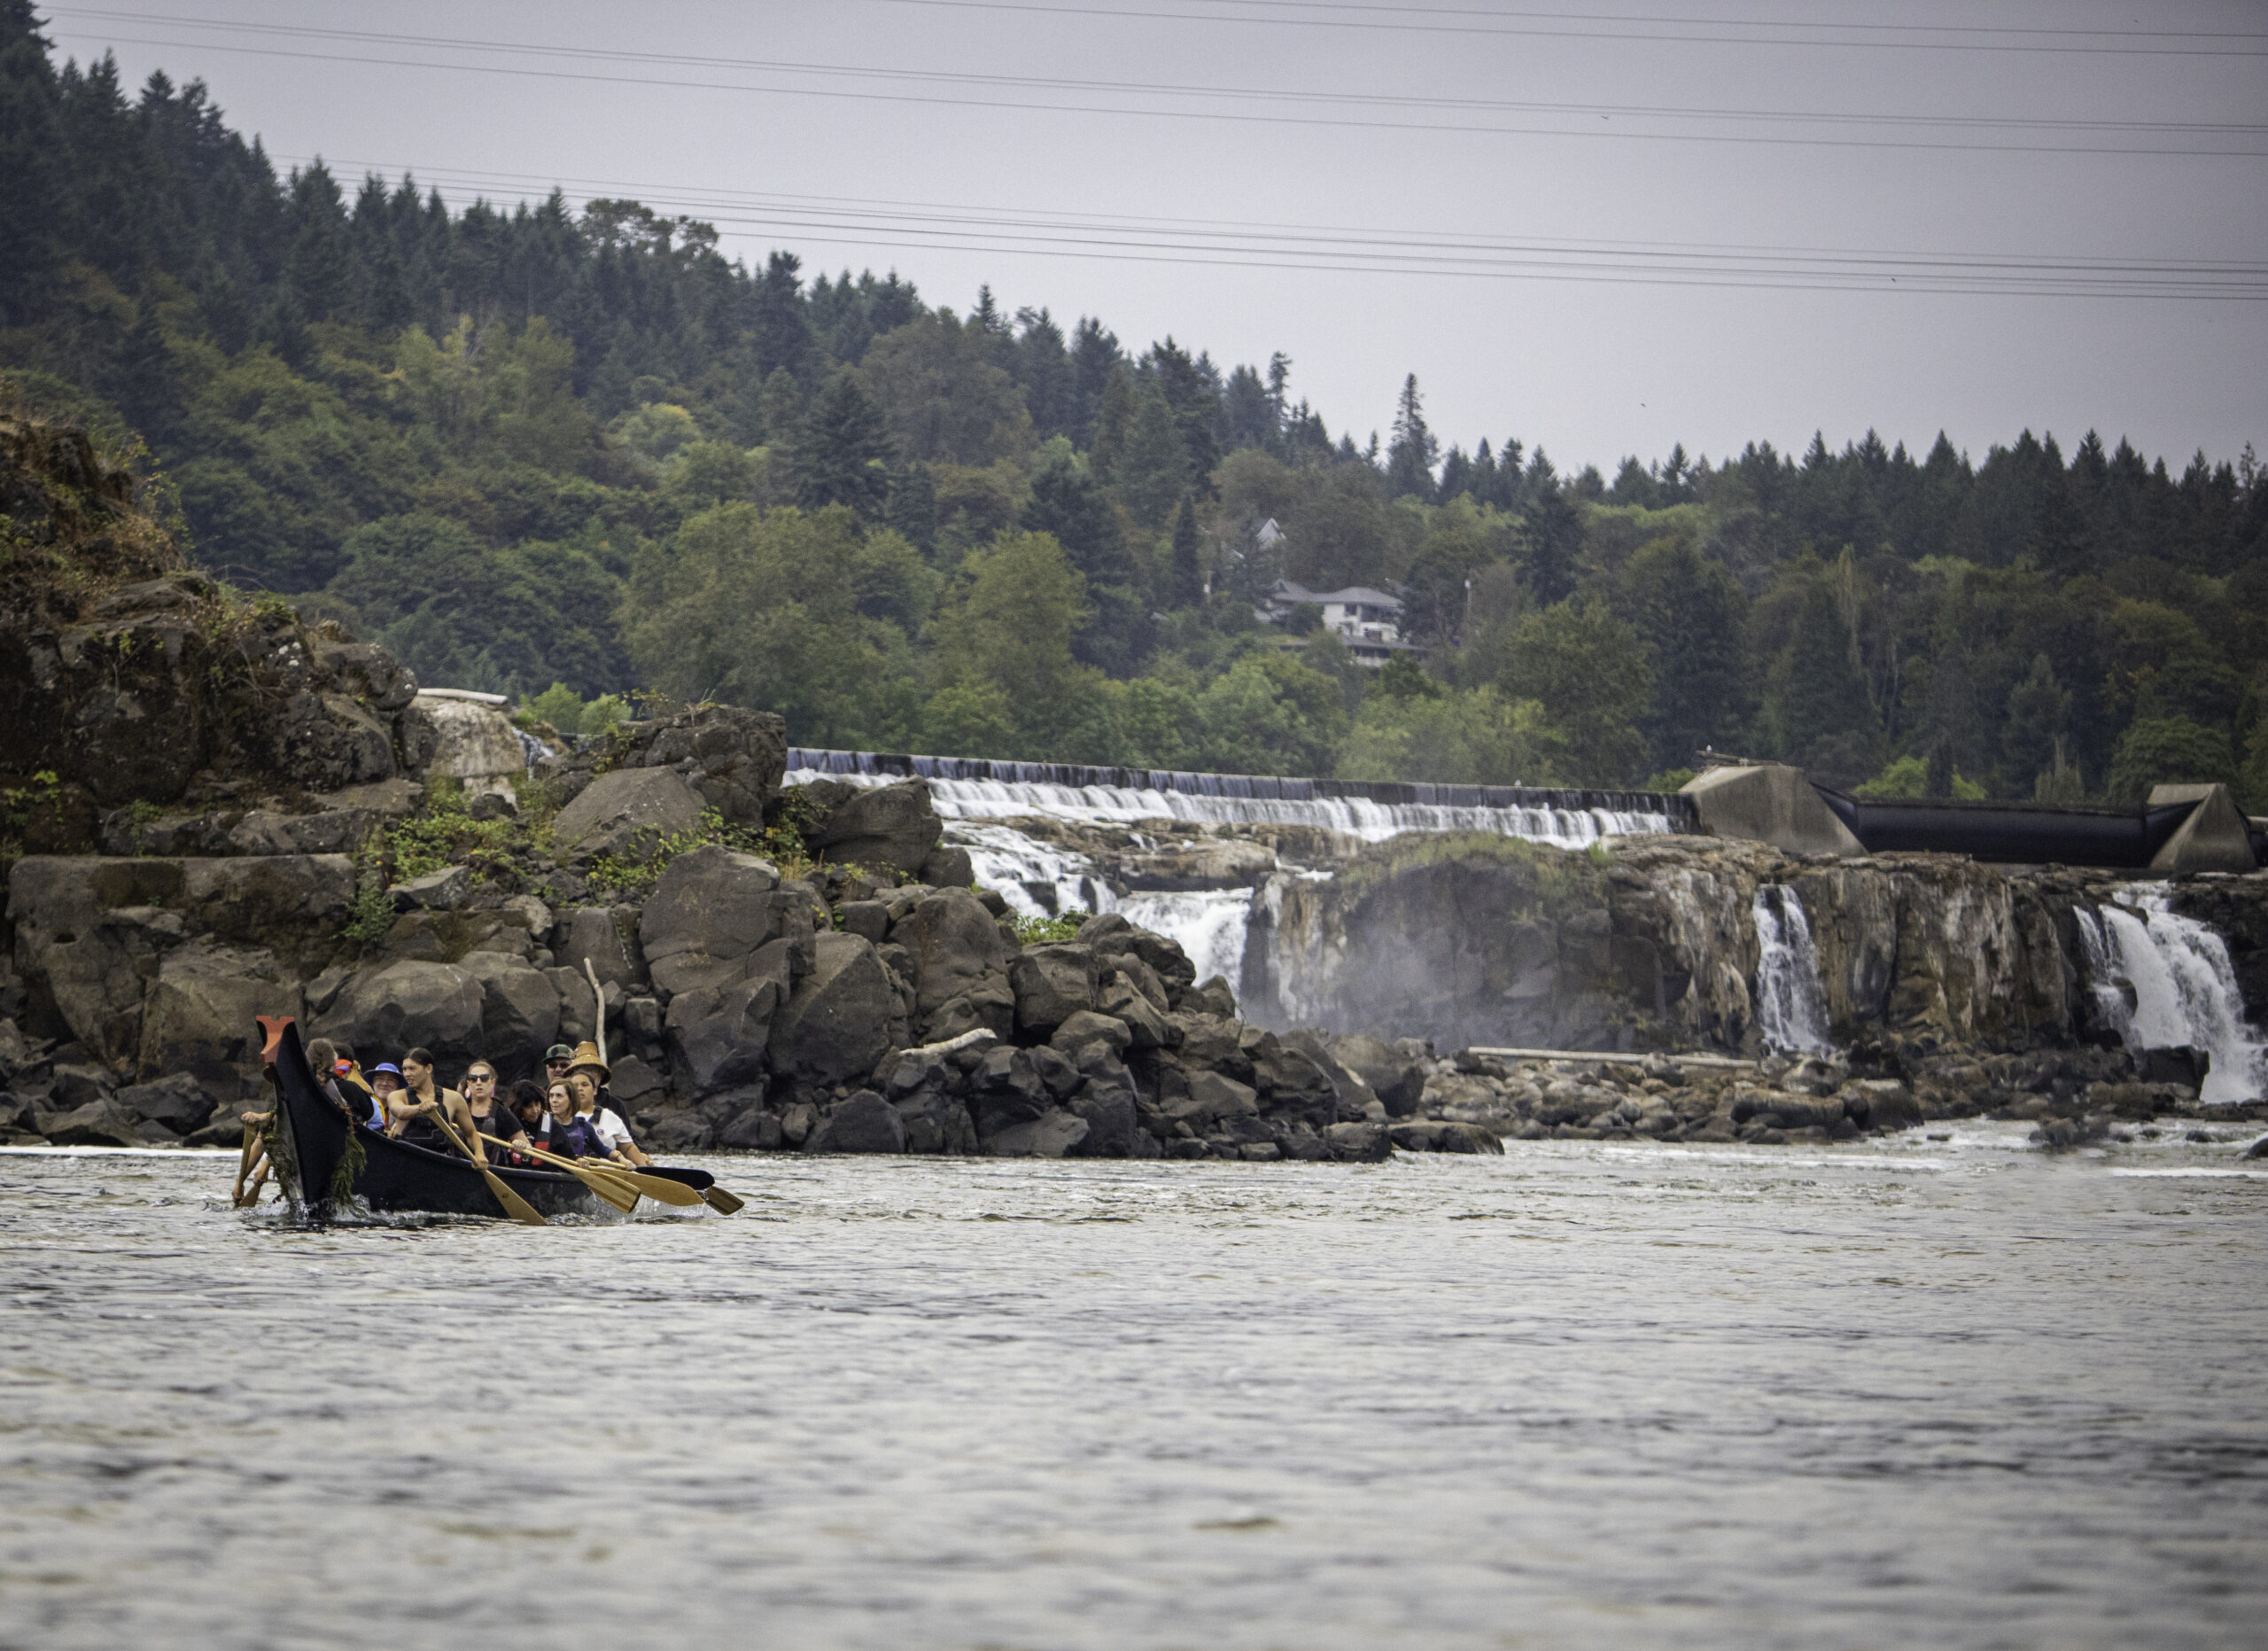 Members of the Confederated Tribes of Grand Ronde paddle a traditional canoe at Willamette Falls.